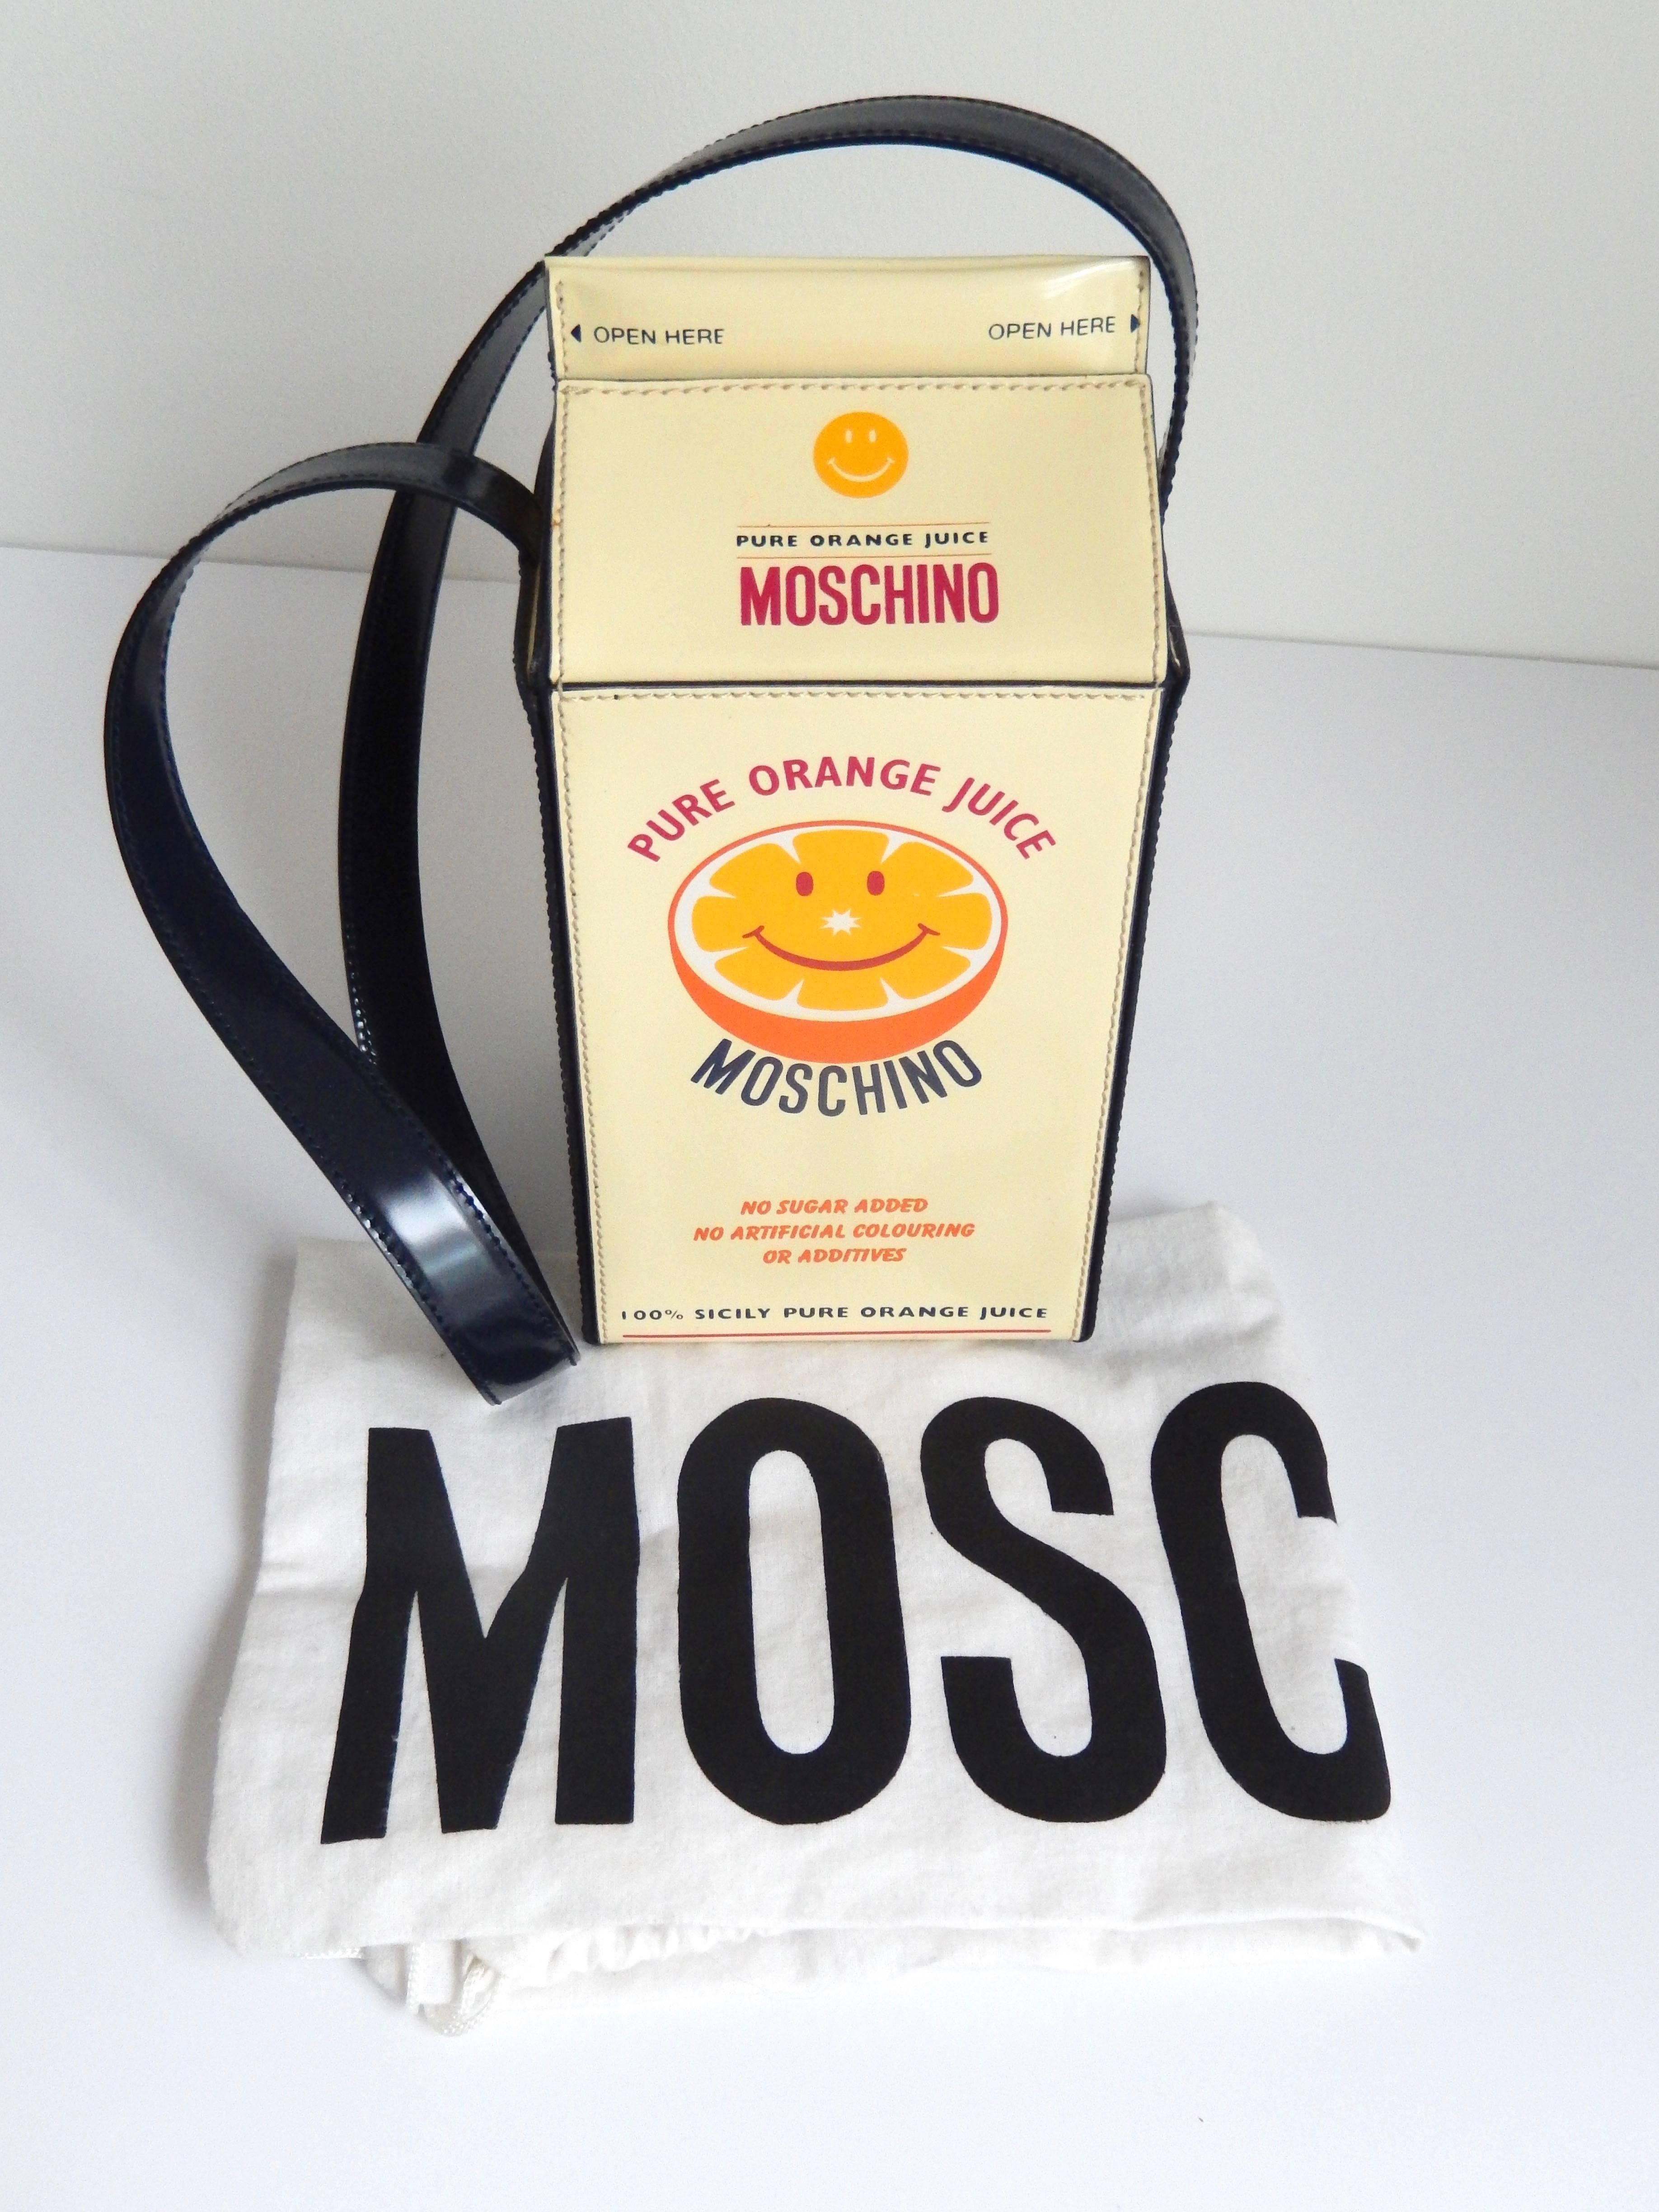 A highly collectible, vintage handbag by Moschino in the shape of an orange juice carton, 